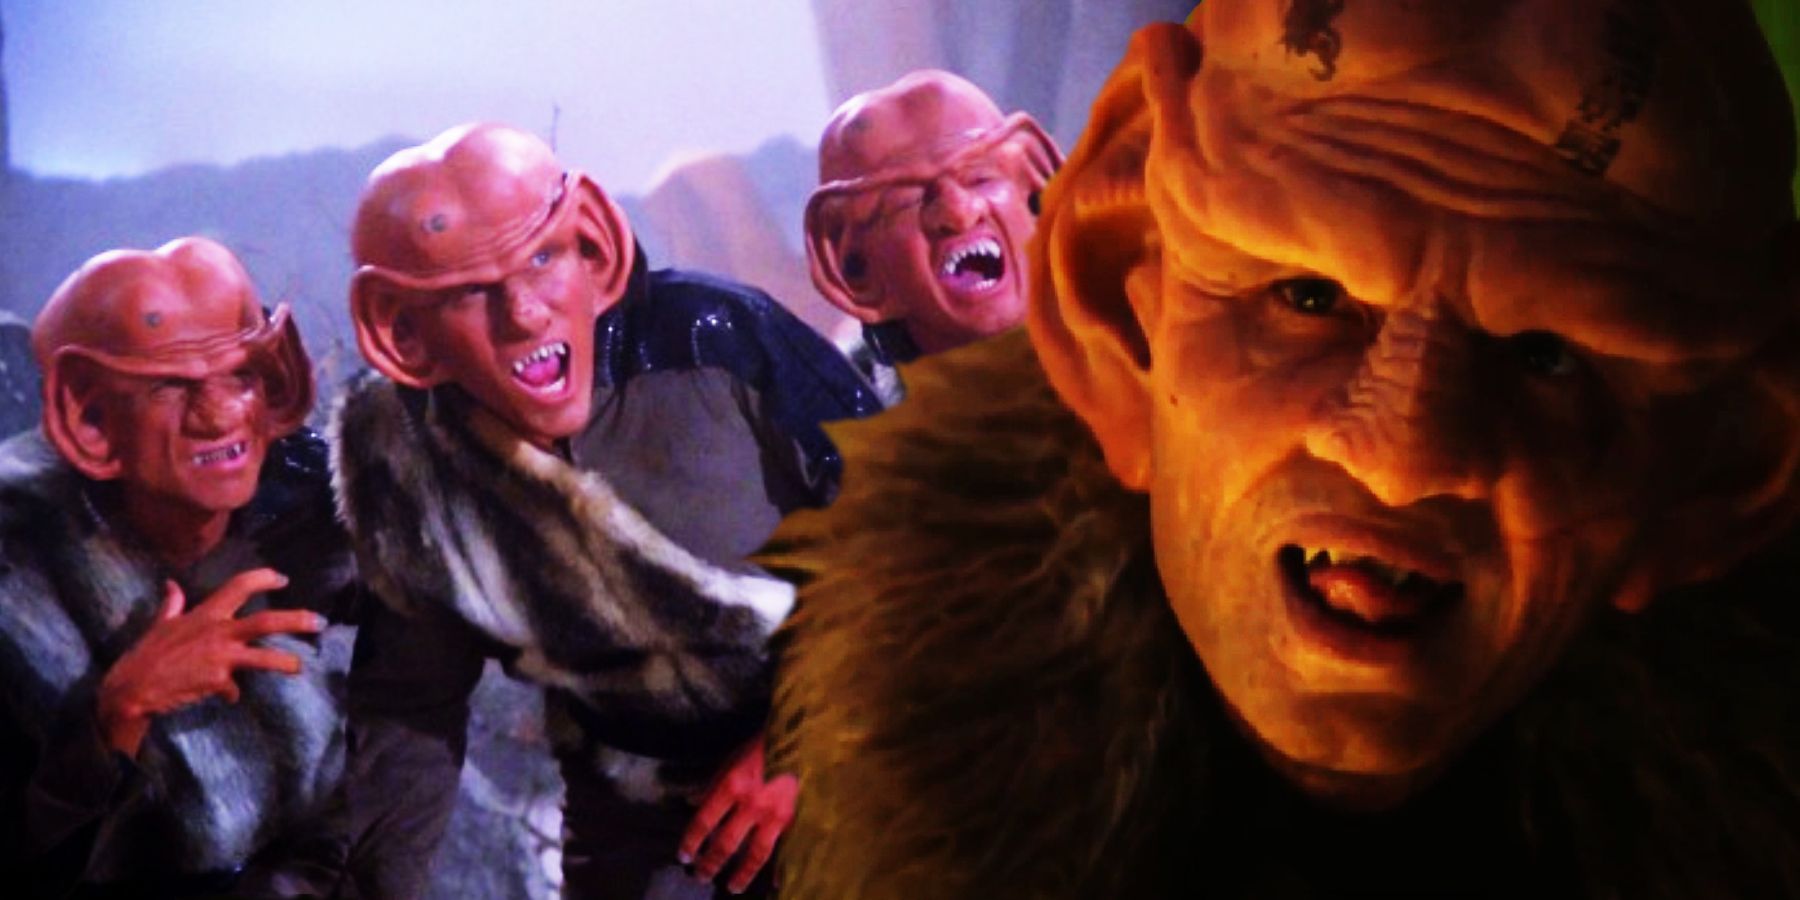 The Last Outpost Ferengi and Sneed from Star Trek Picard